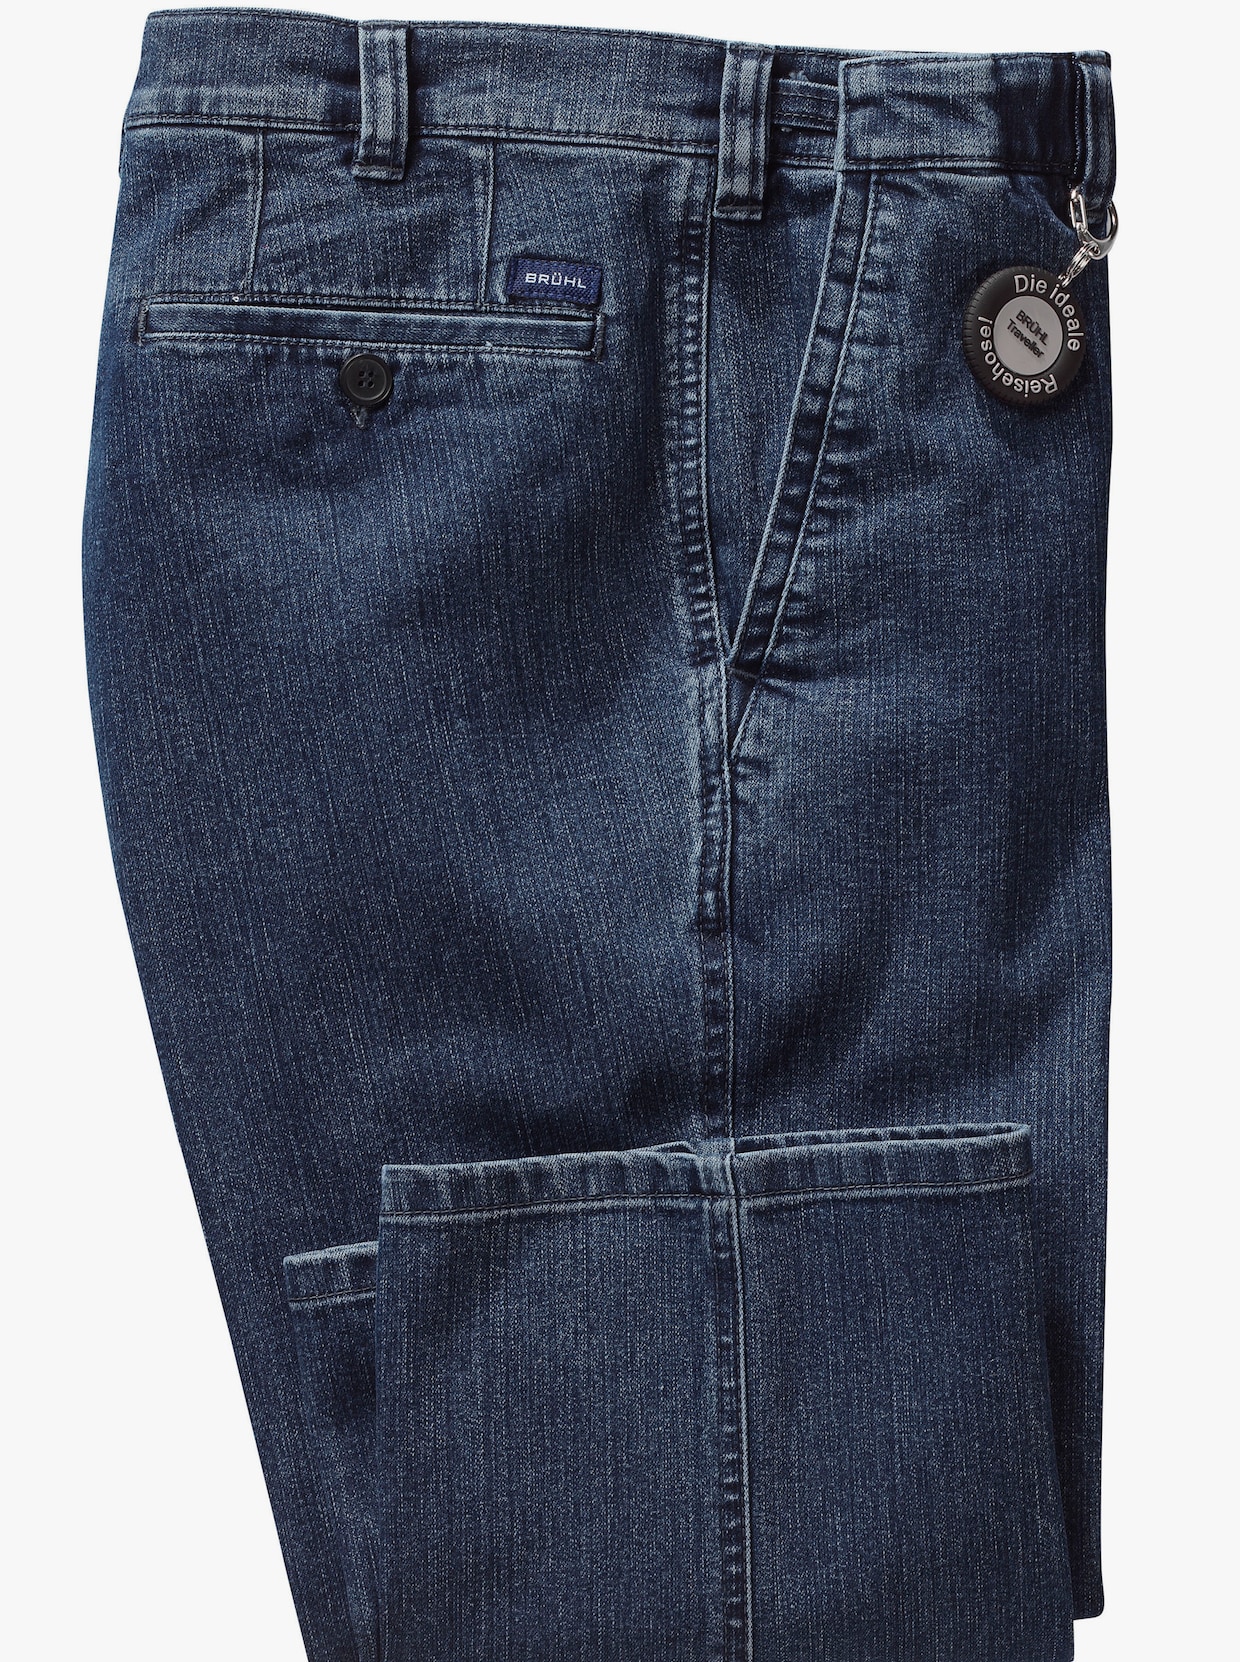 Traveller-Jeans - blue-stone-washed